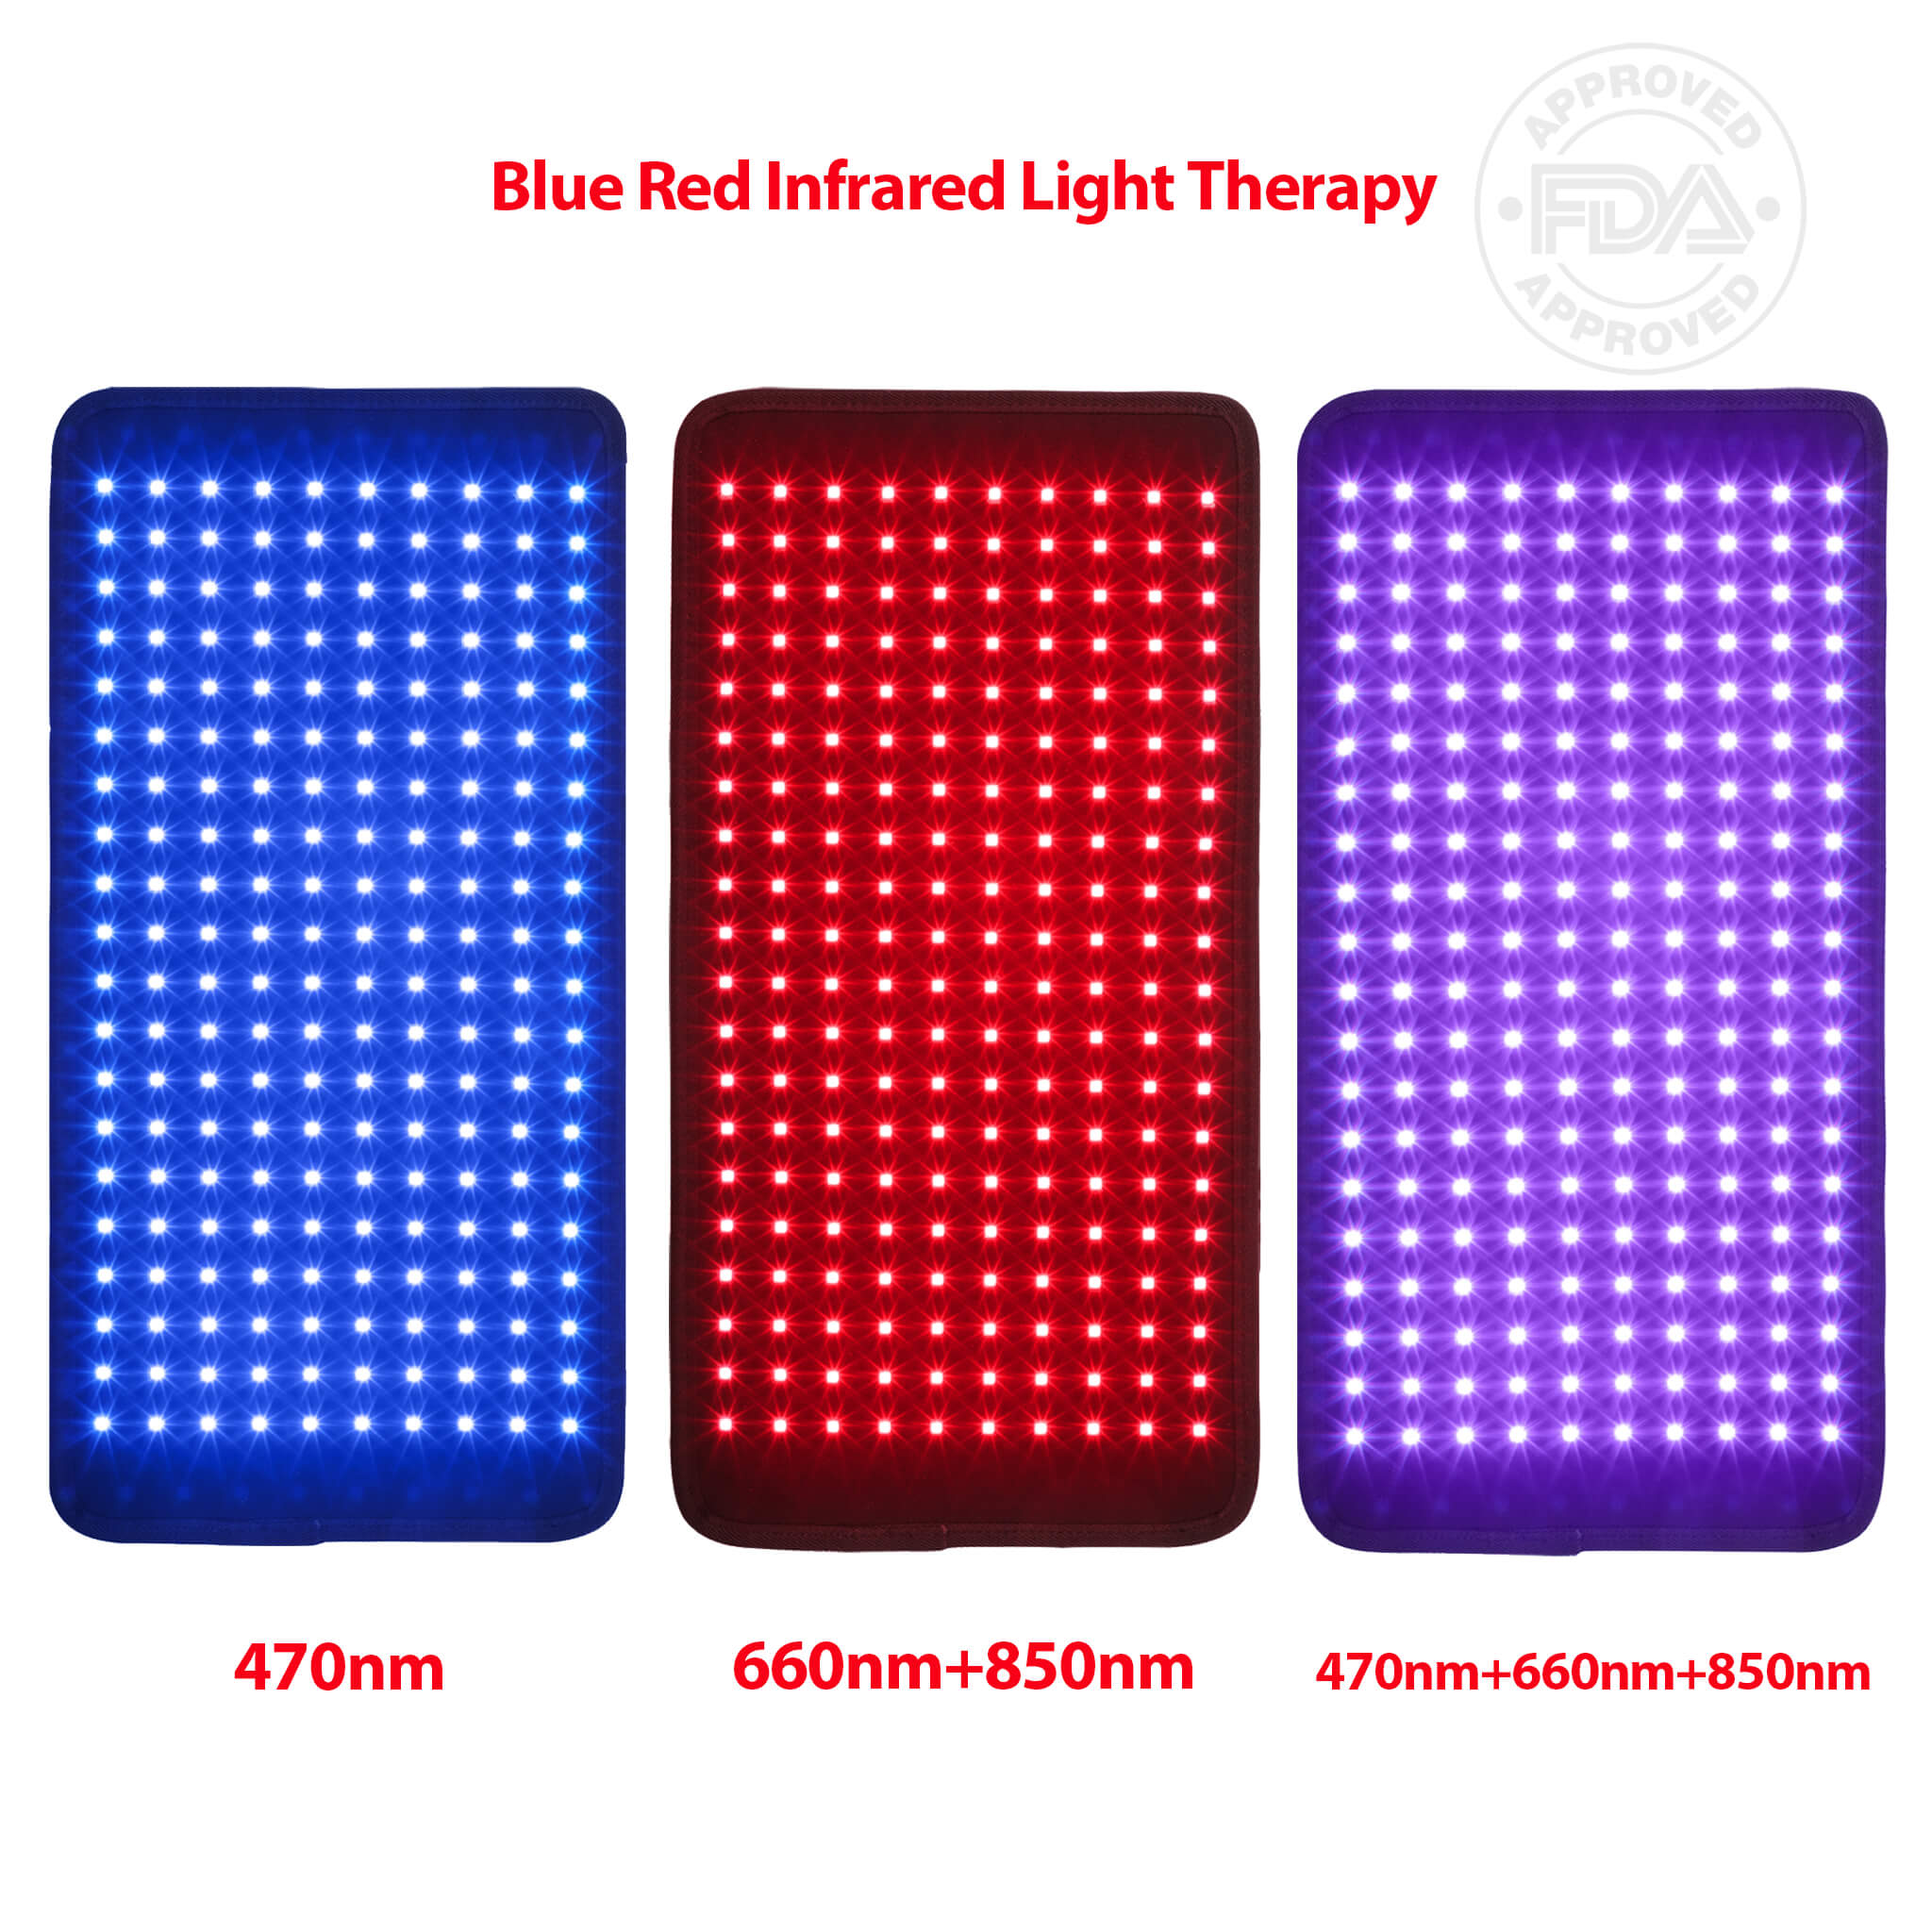 red infrared light therapy mate